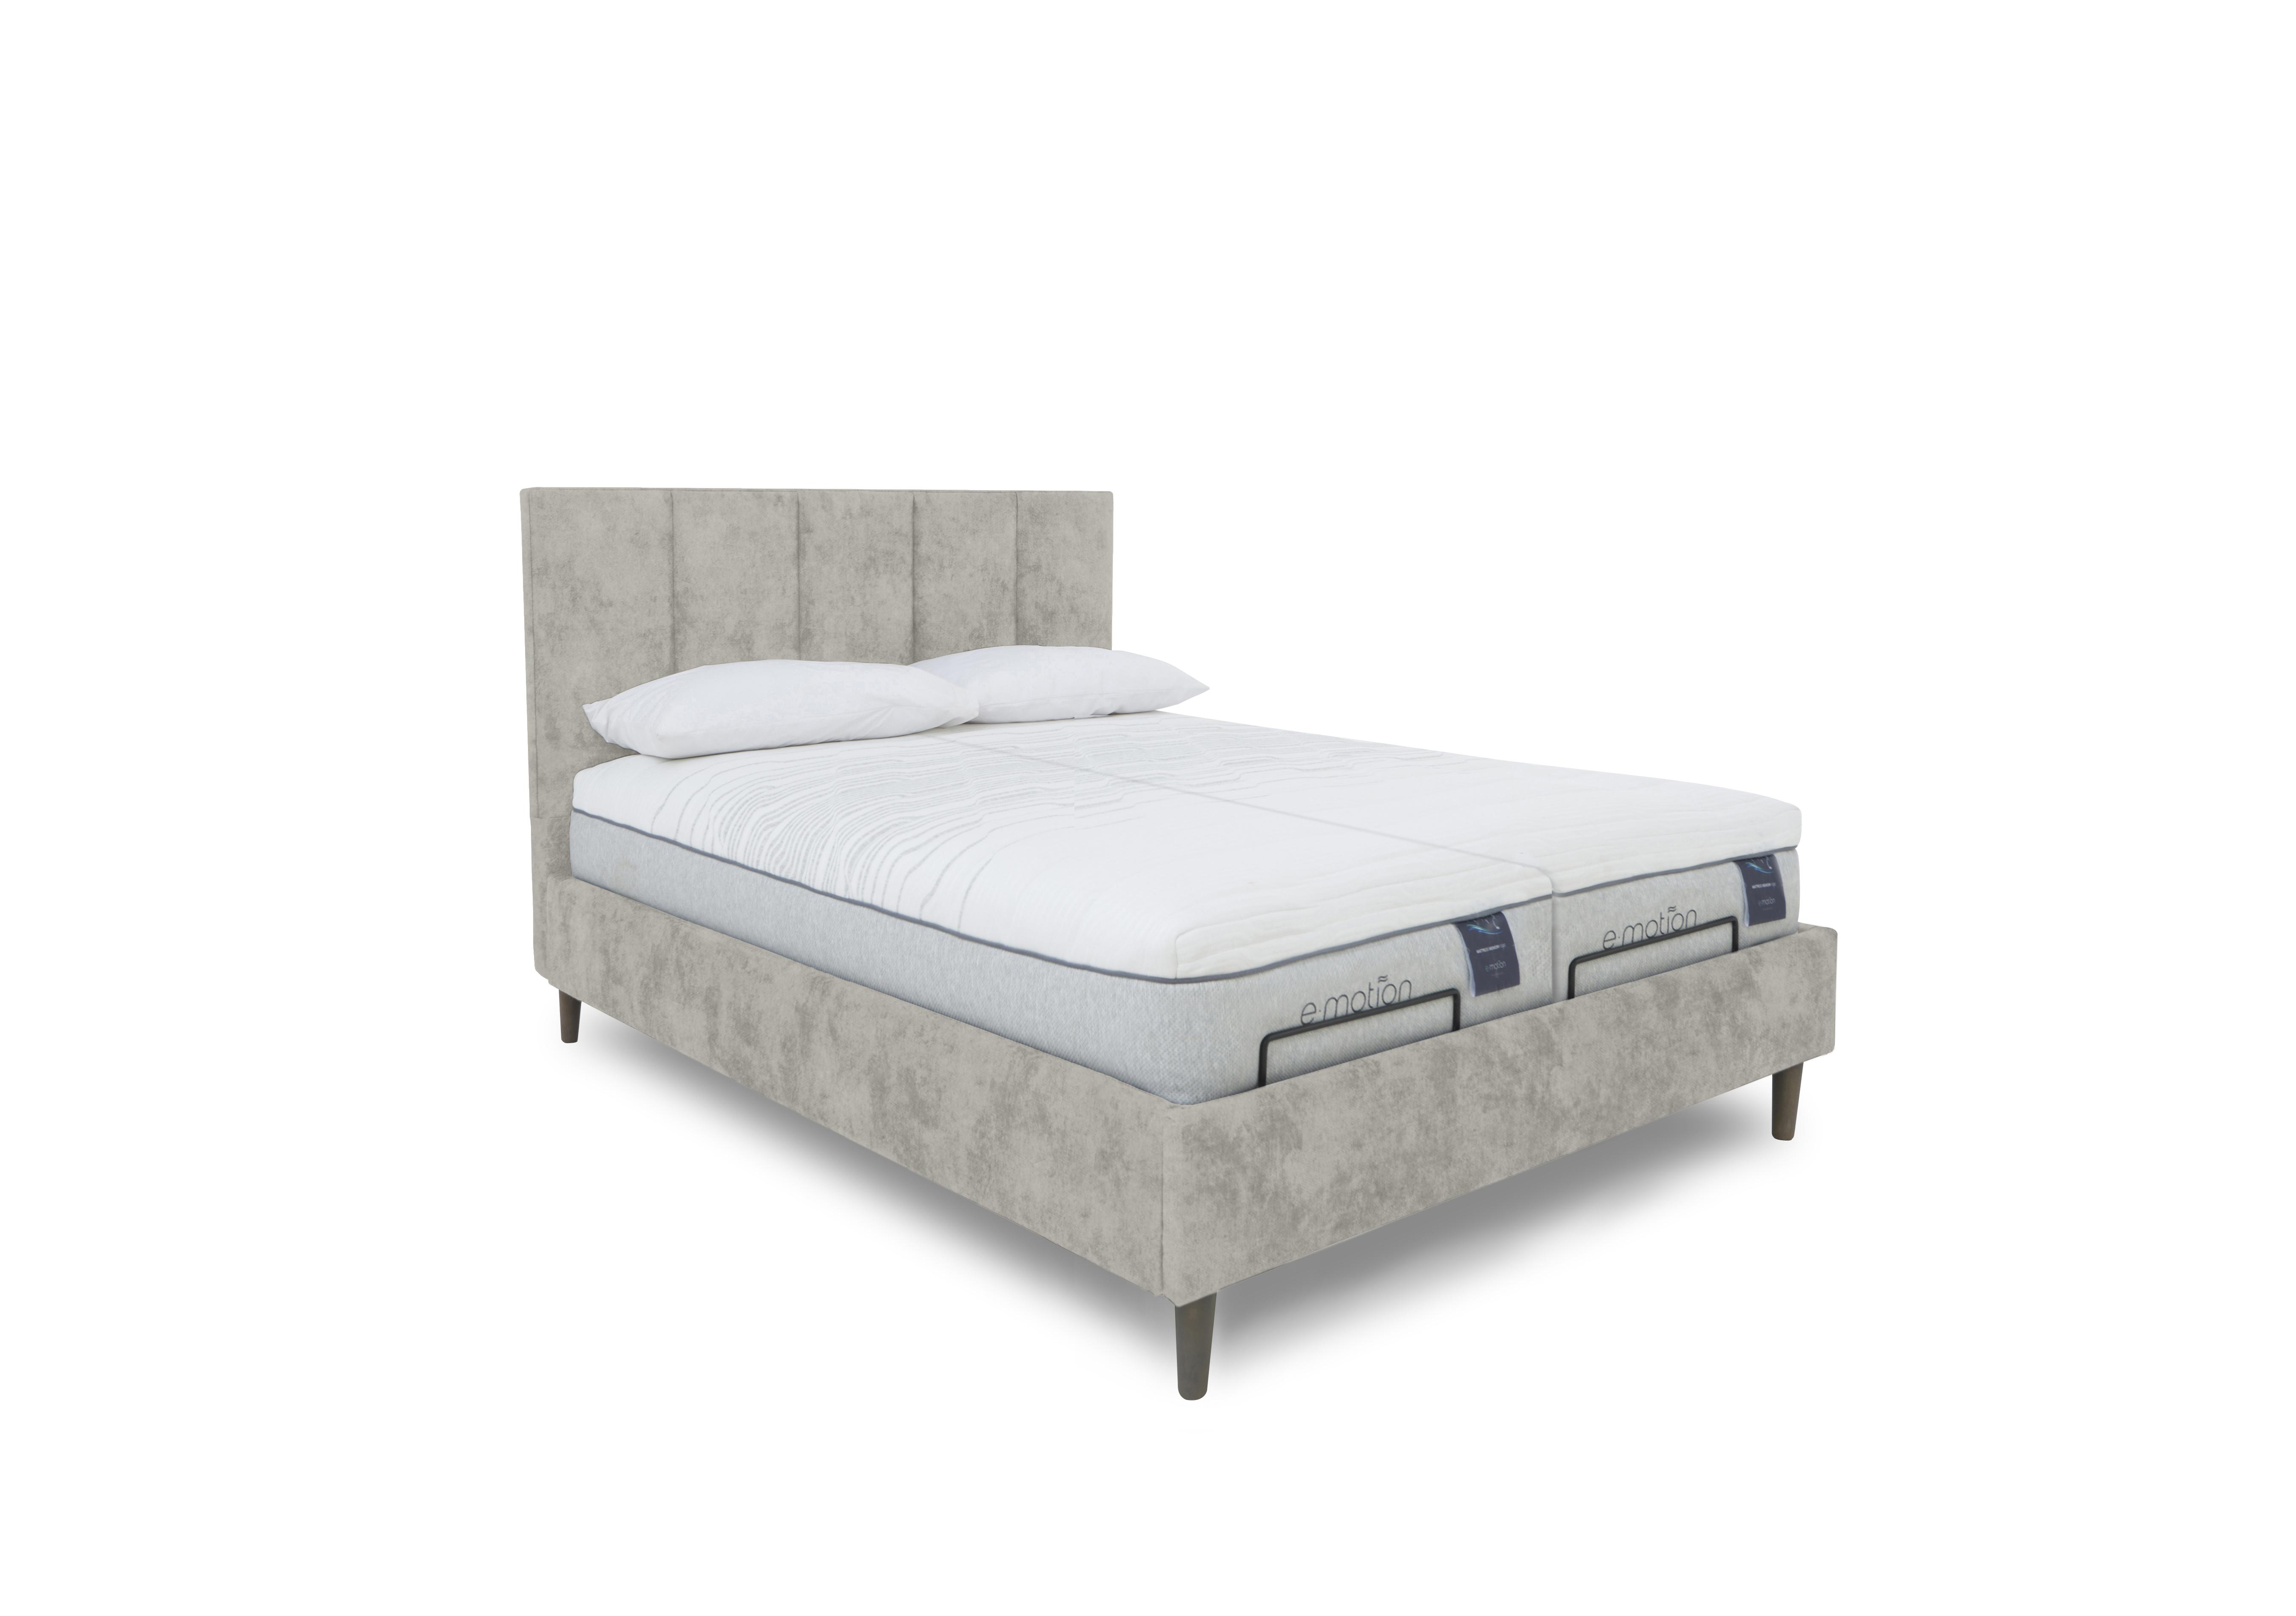 E-Motion Aiko Dual Adjustable Bed Frame with Massage Function in Daytona Stone on Furniture Village